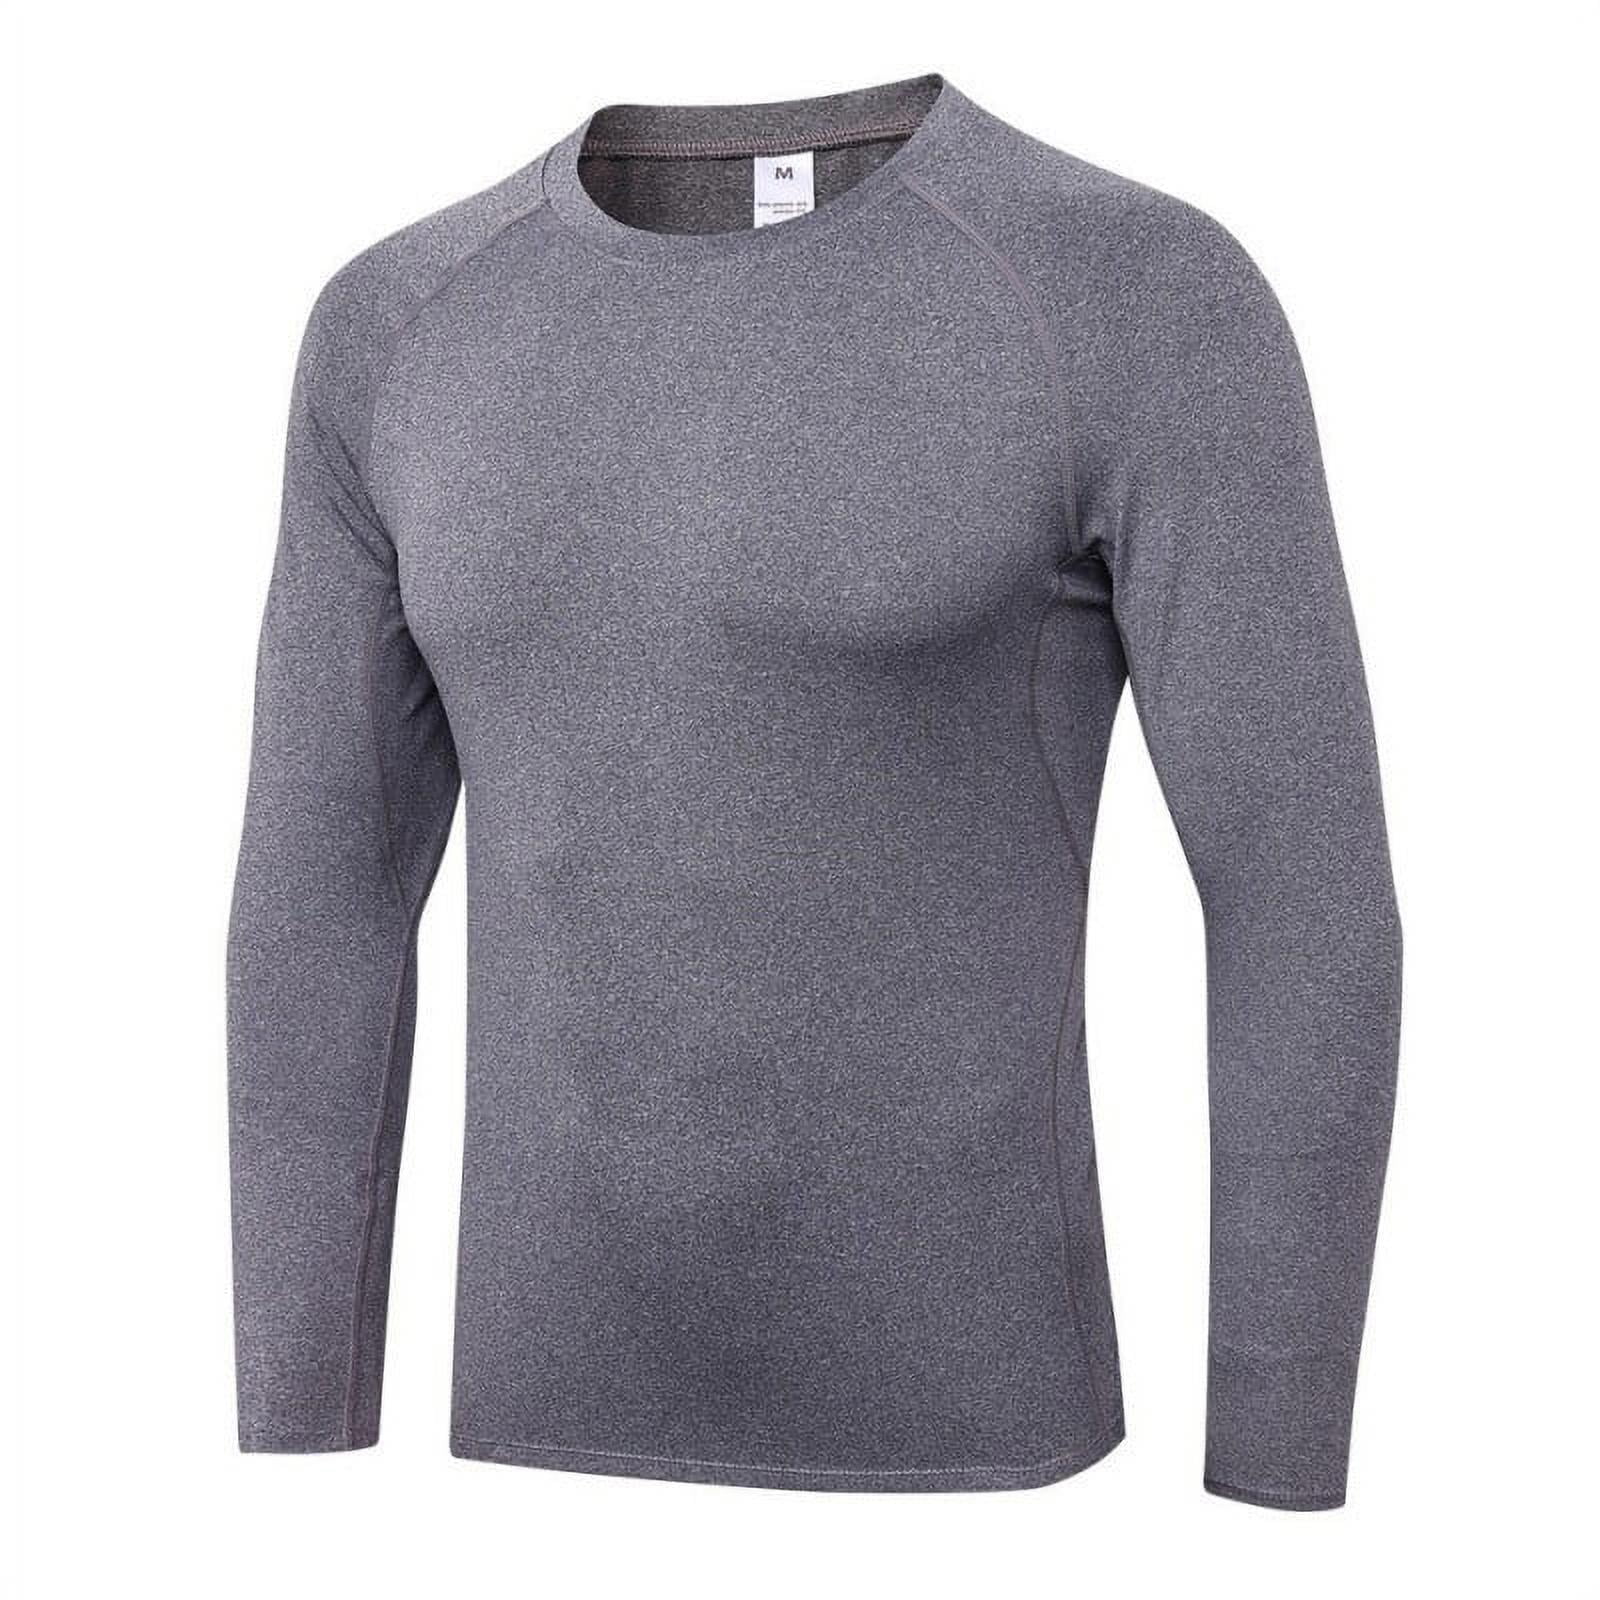 Oaktree-Men's Compression Shirt, Cool Dry Long Sleeve Quick-drying ...